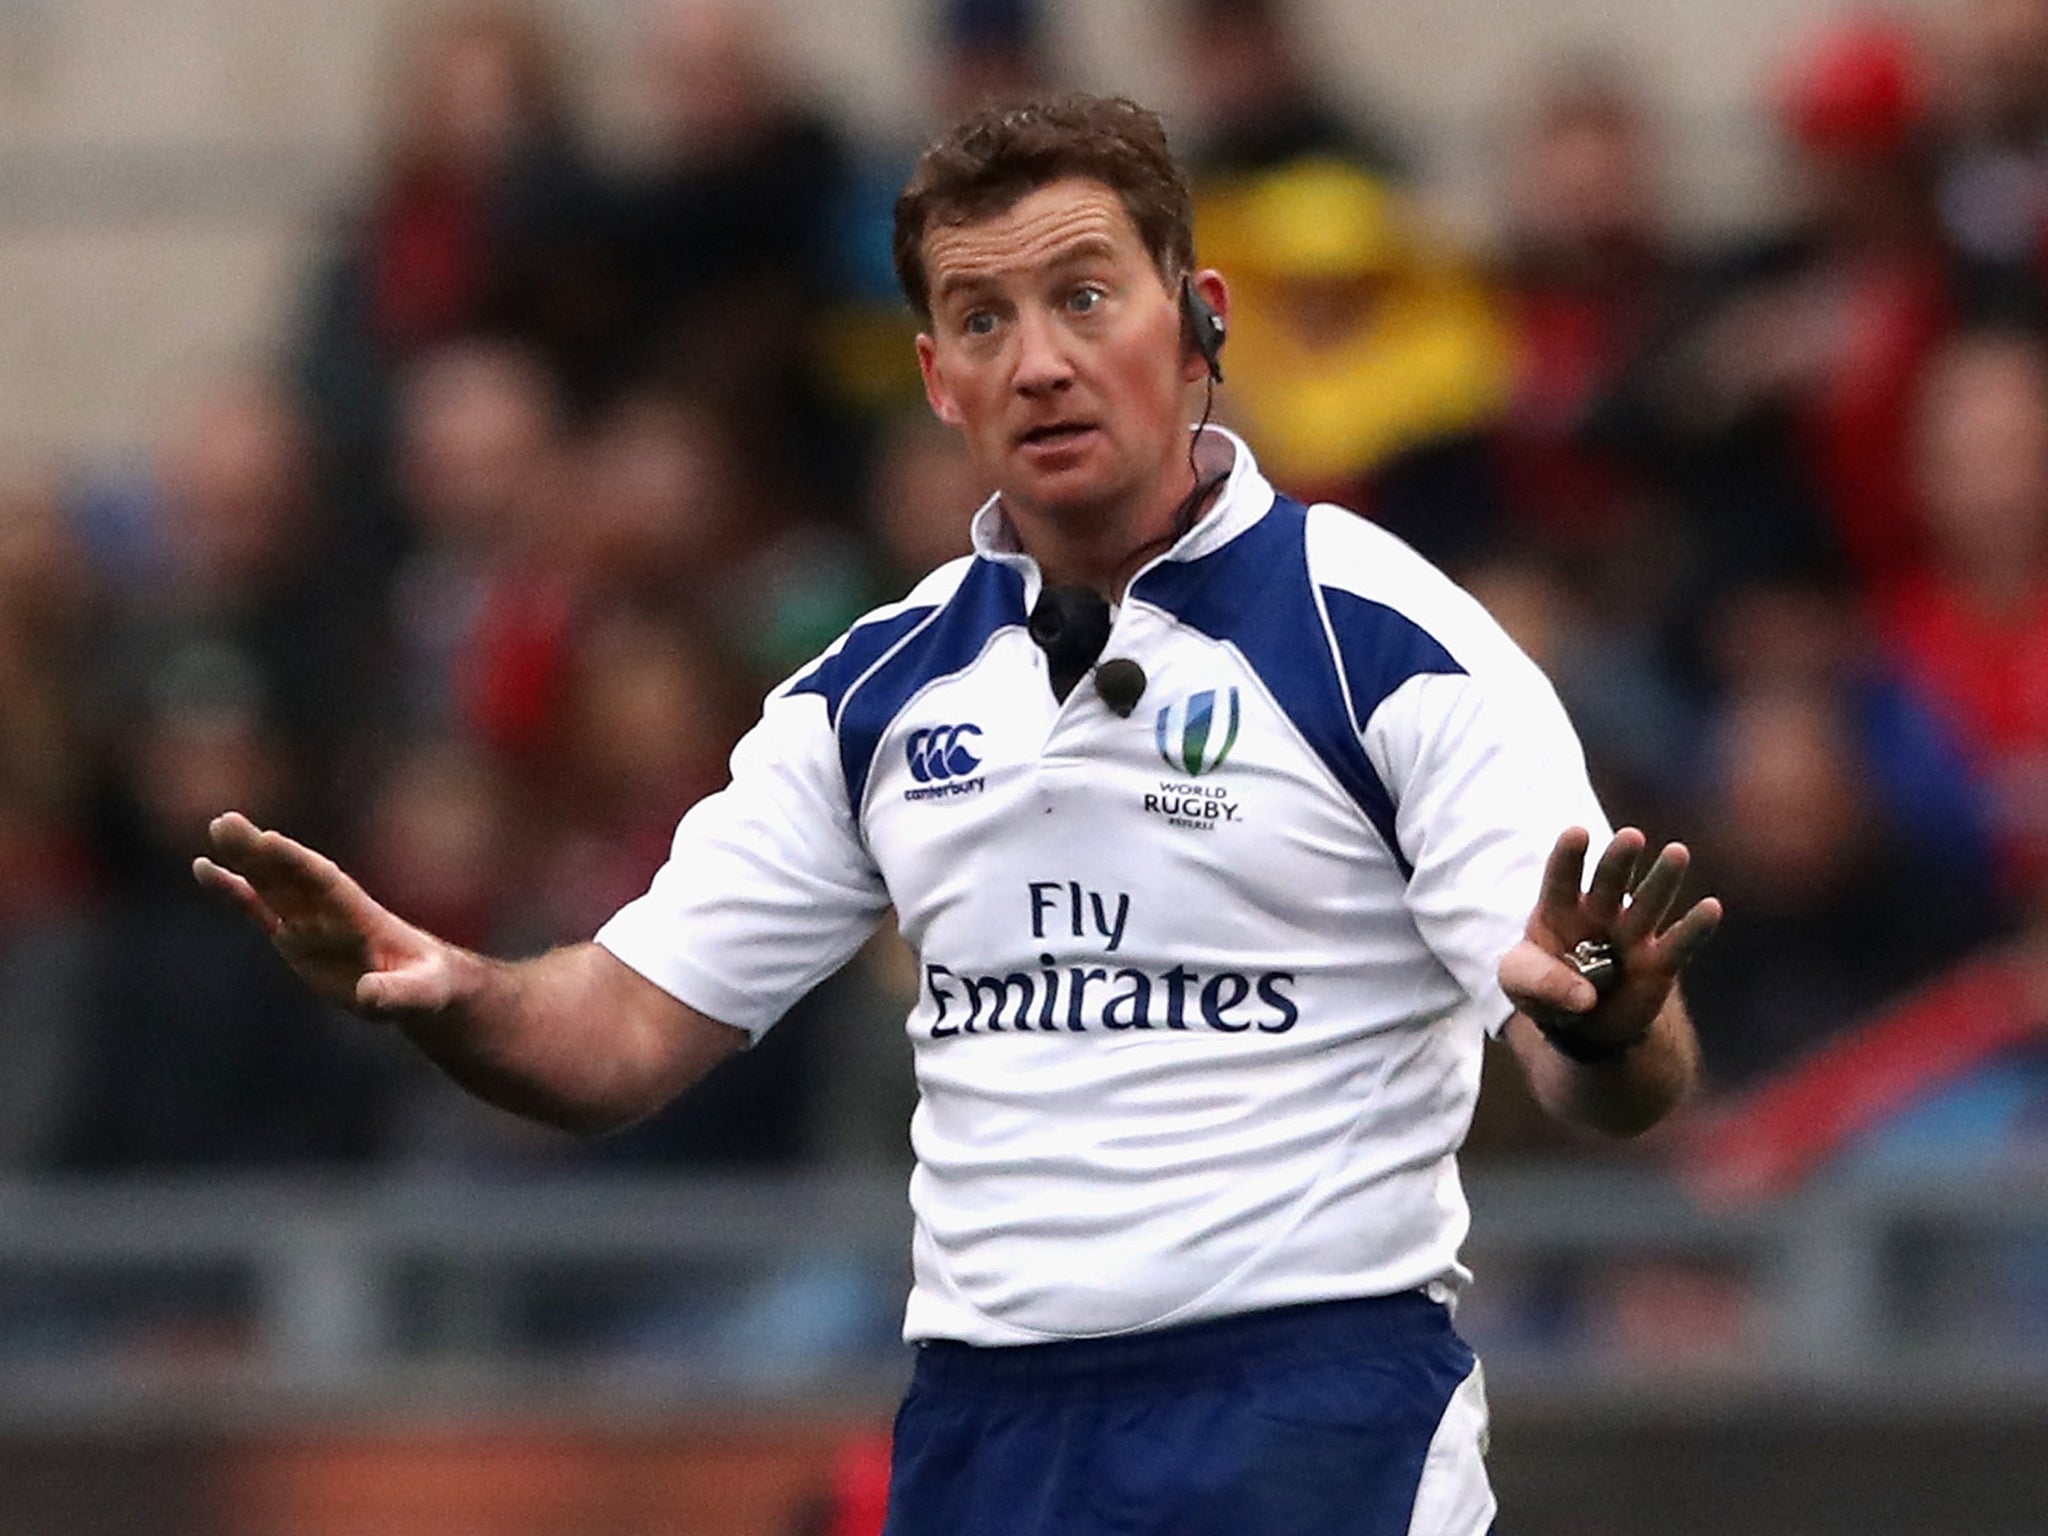 Doyle is registered with the RFU but is from Dublin, opening up his appointment to scrutiny